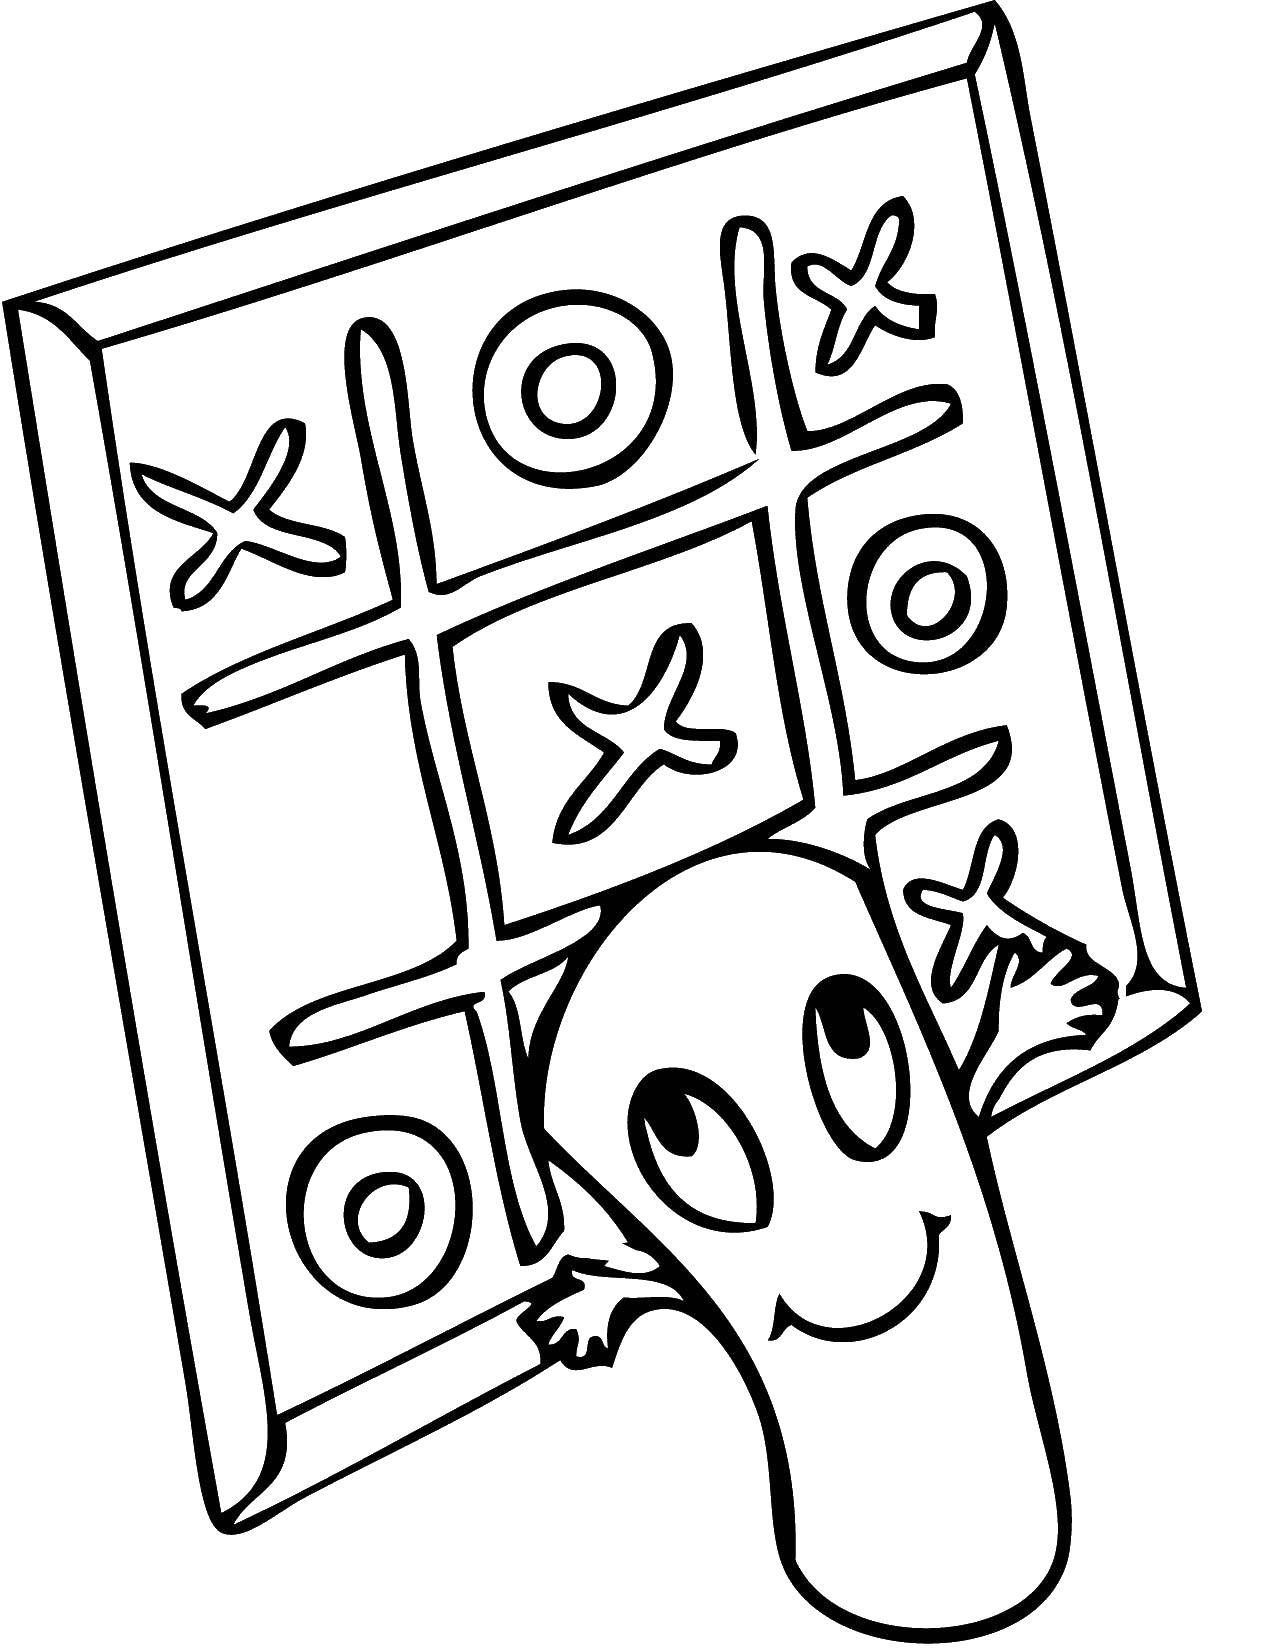 Coloring Game cross toe. Category games. Tags:  the game TIC, TAC toe.